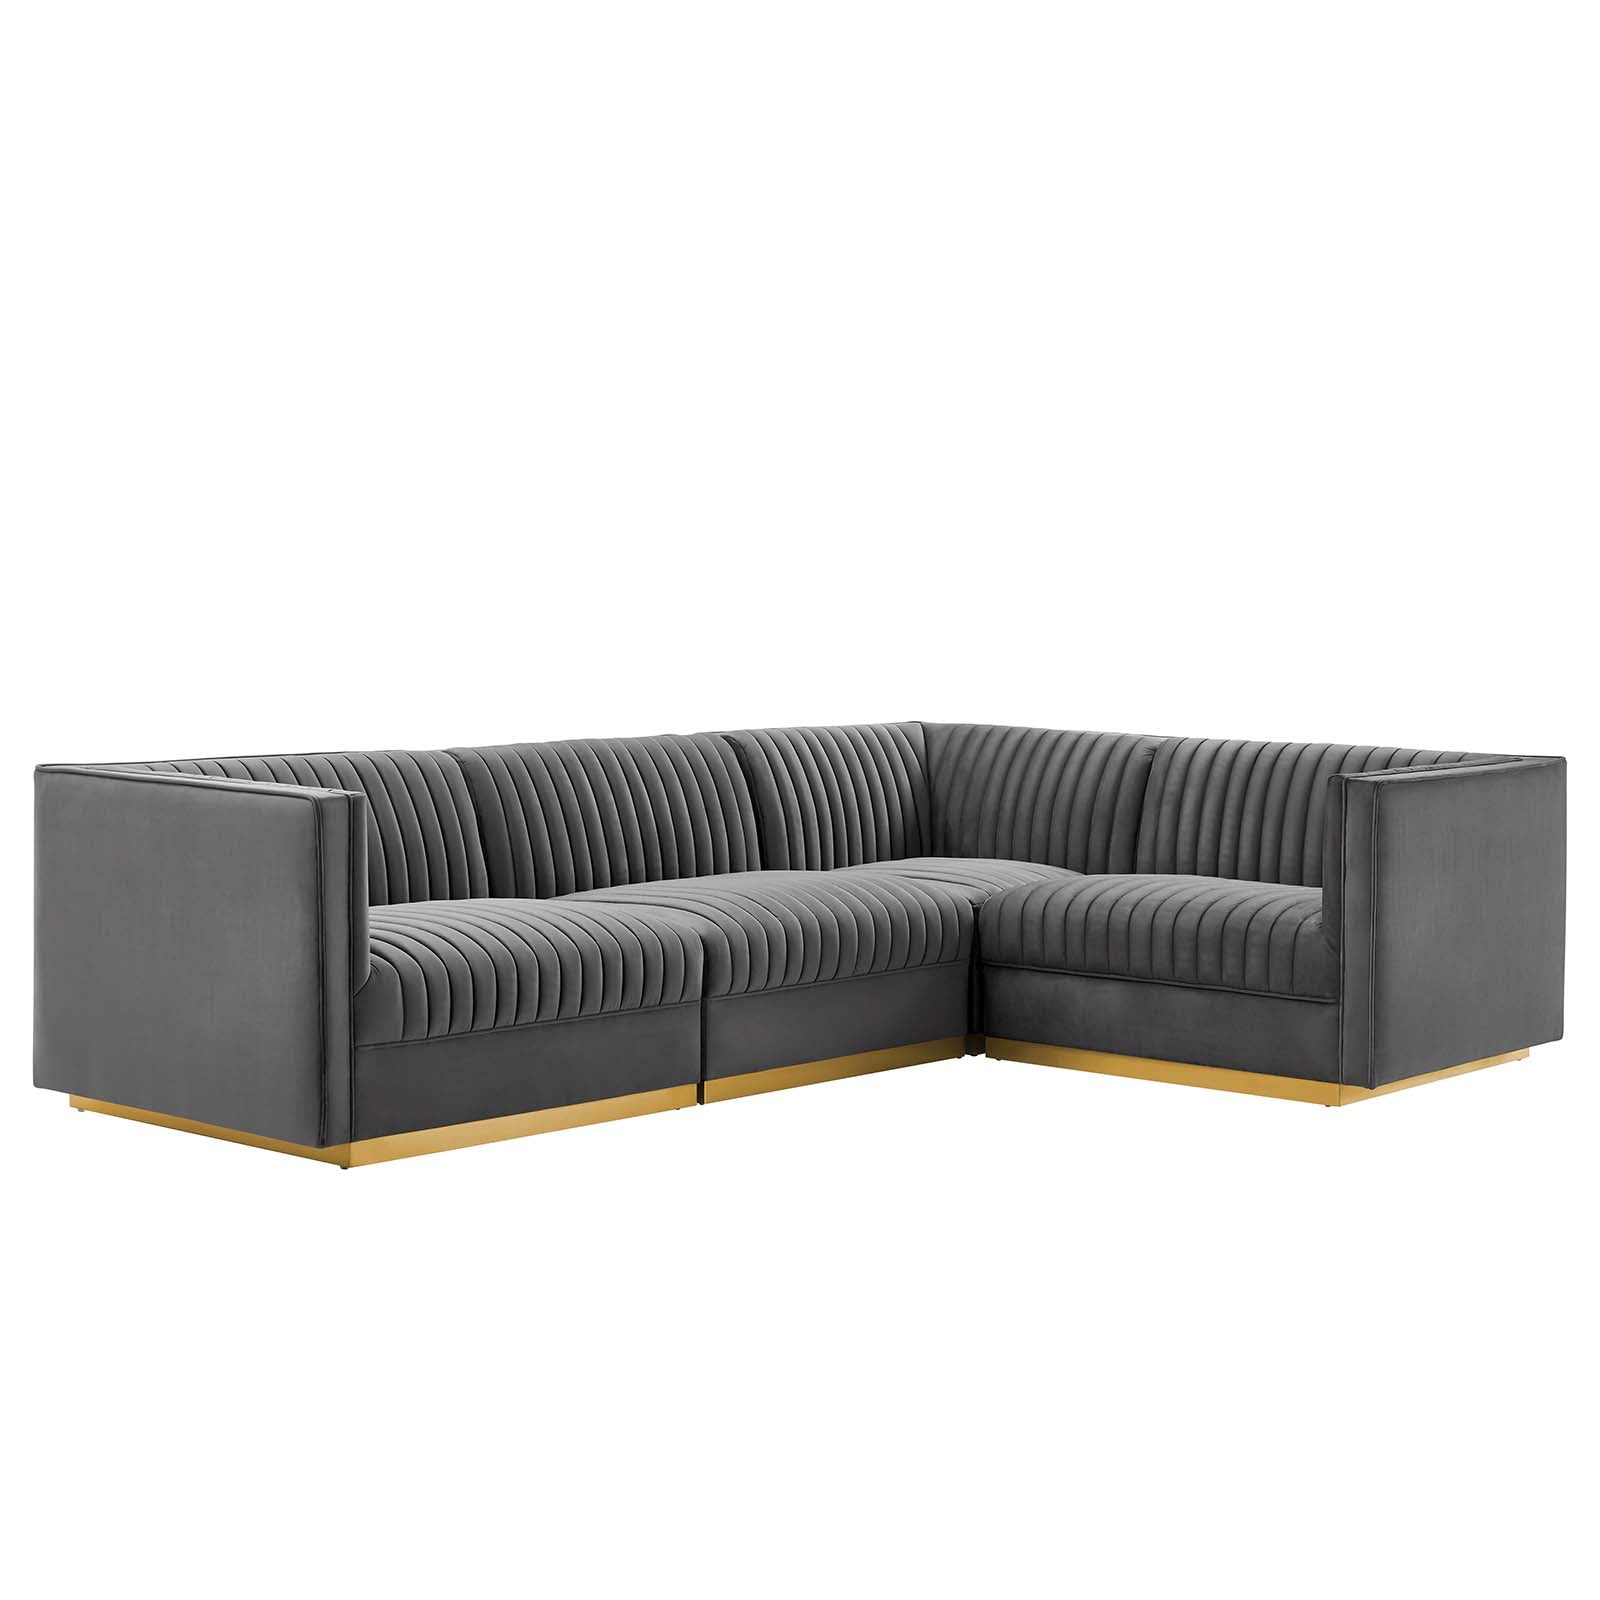 Modway Sectional Sofas - Sanguine Channel Tufted Performance Velvet 4 Piece Right-Facing Modular Sectional Sofa Gray